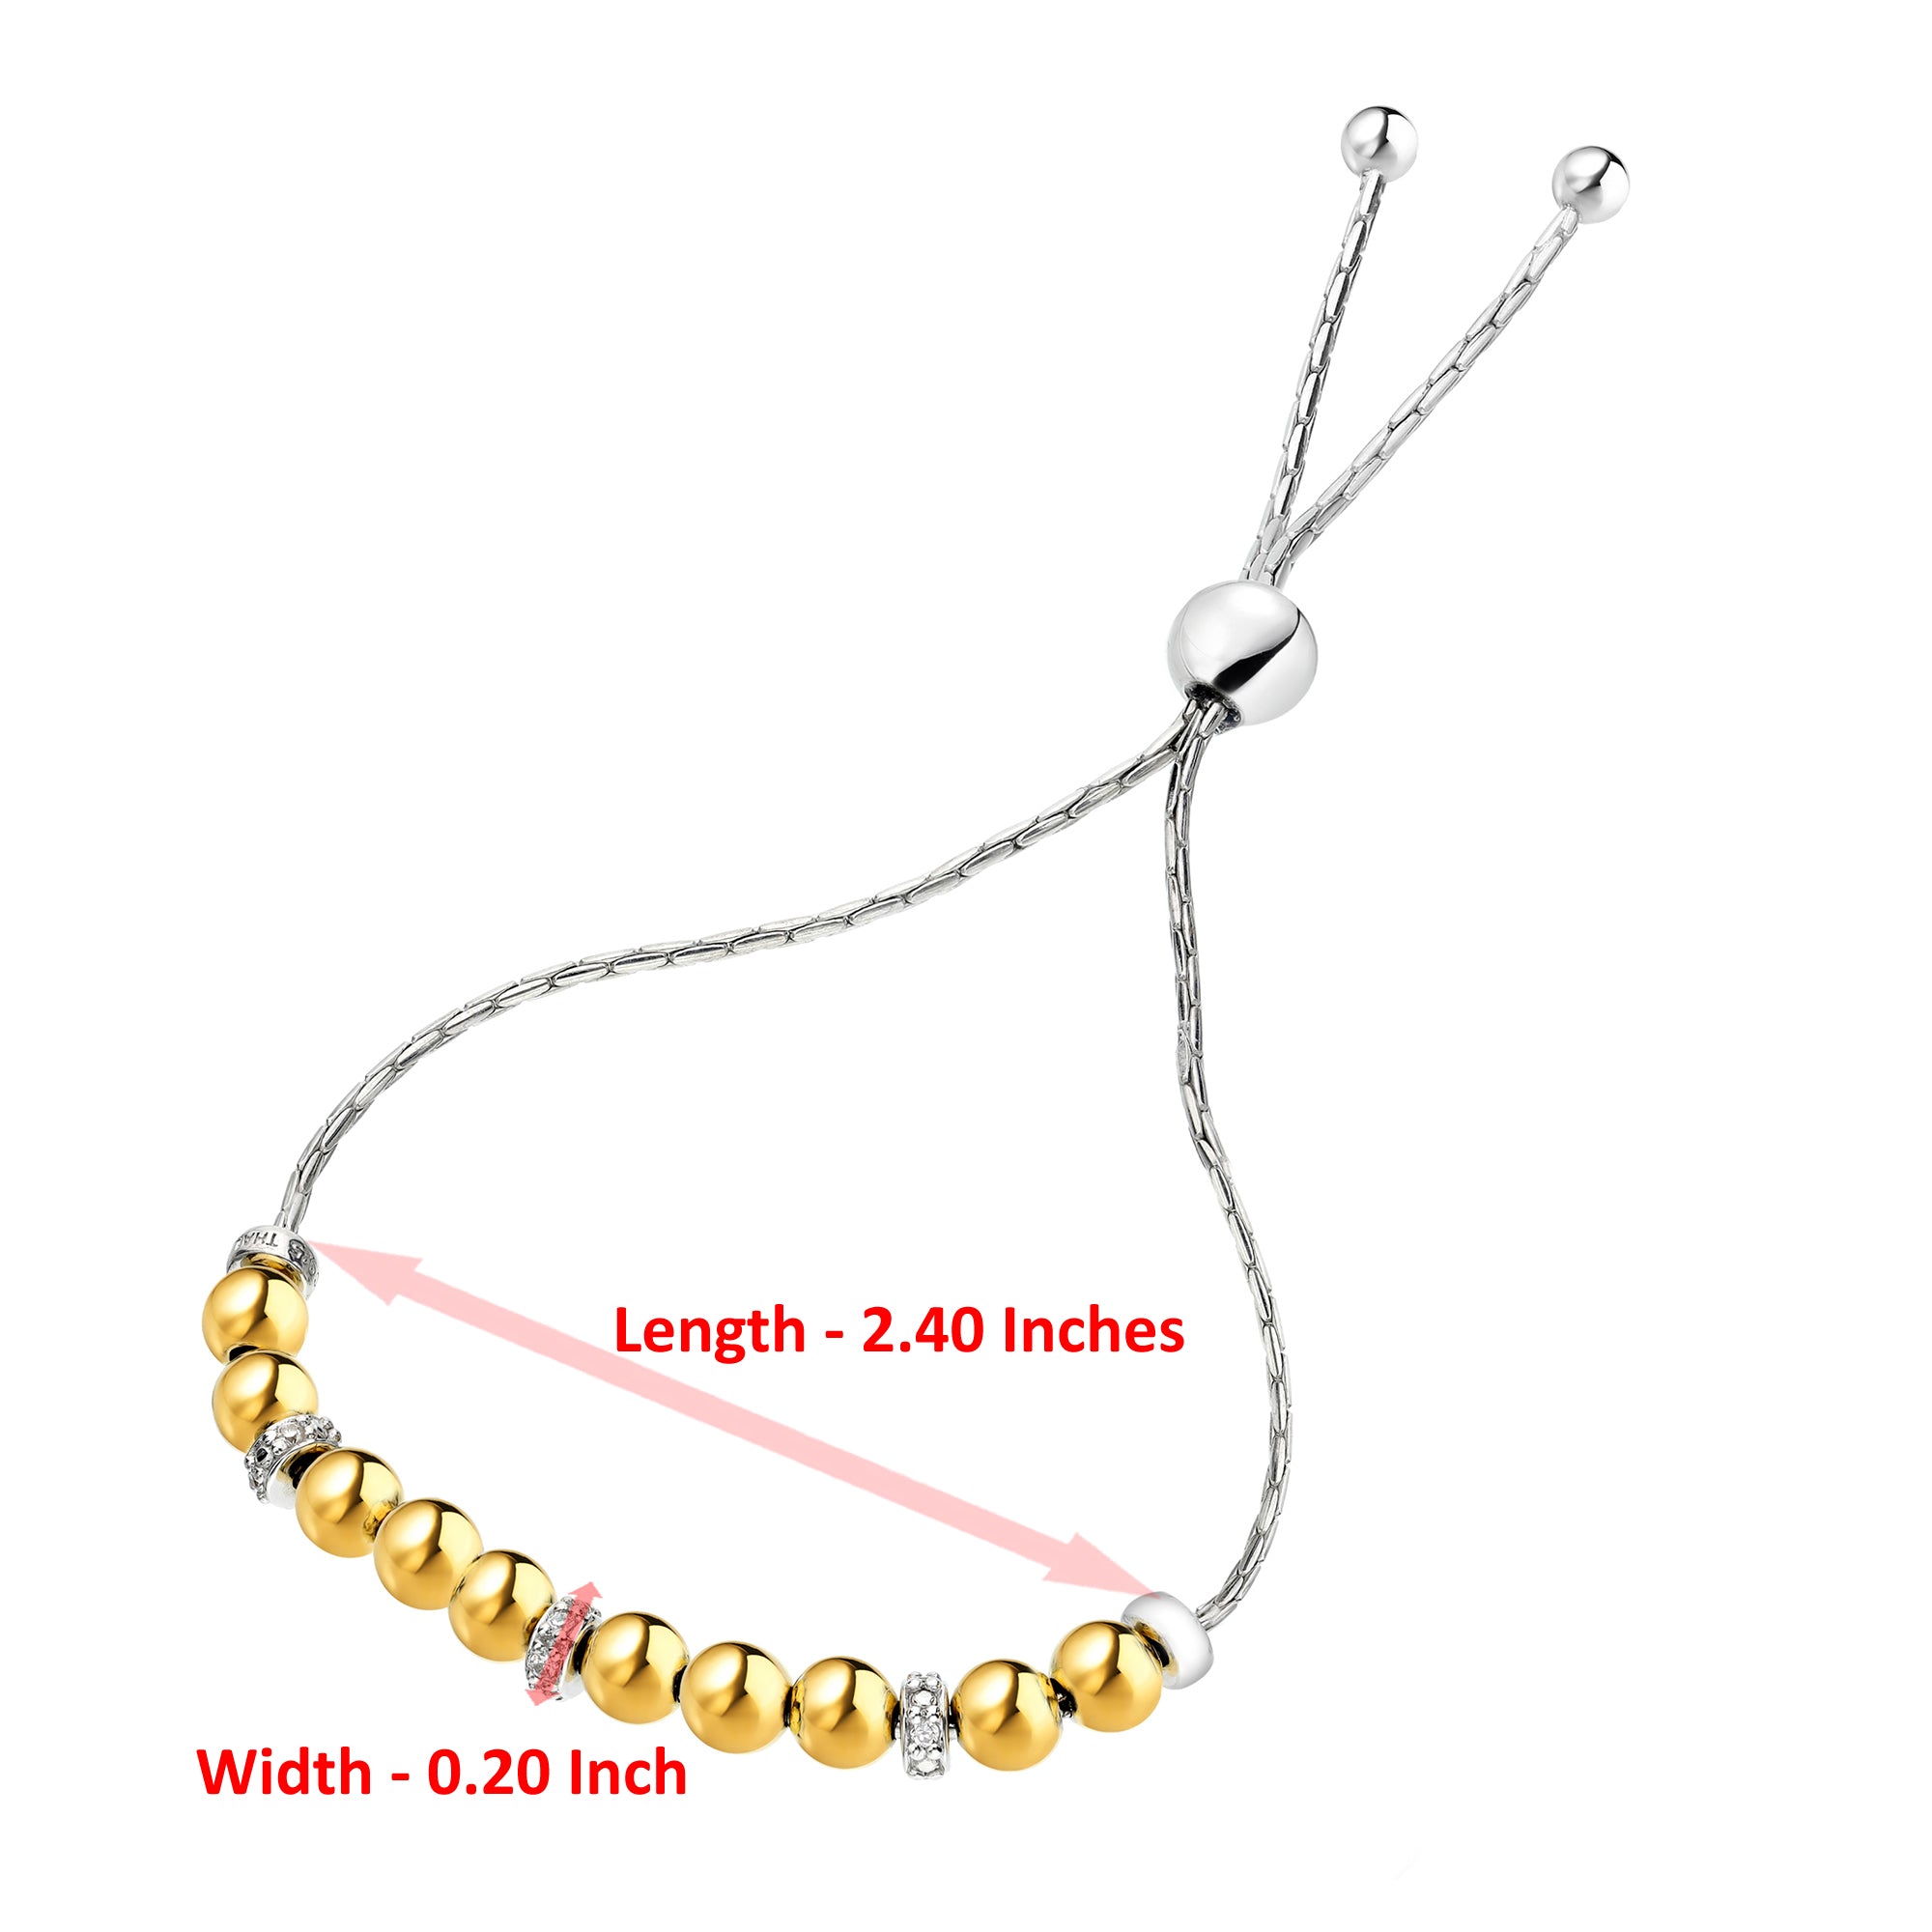 1/10 cttw Diamond Bolo Bracelet Yellow Gold Plated over Silver Beads Style